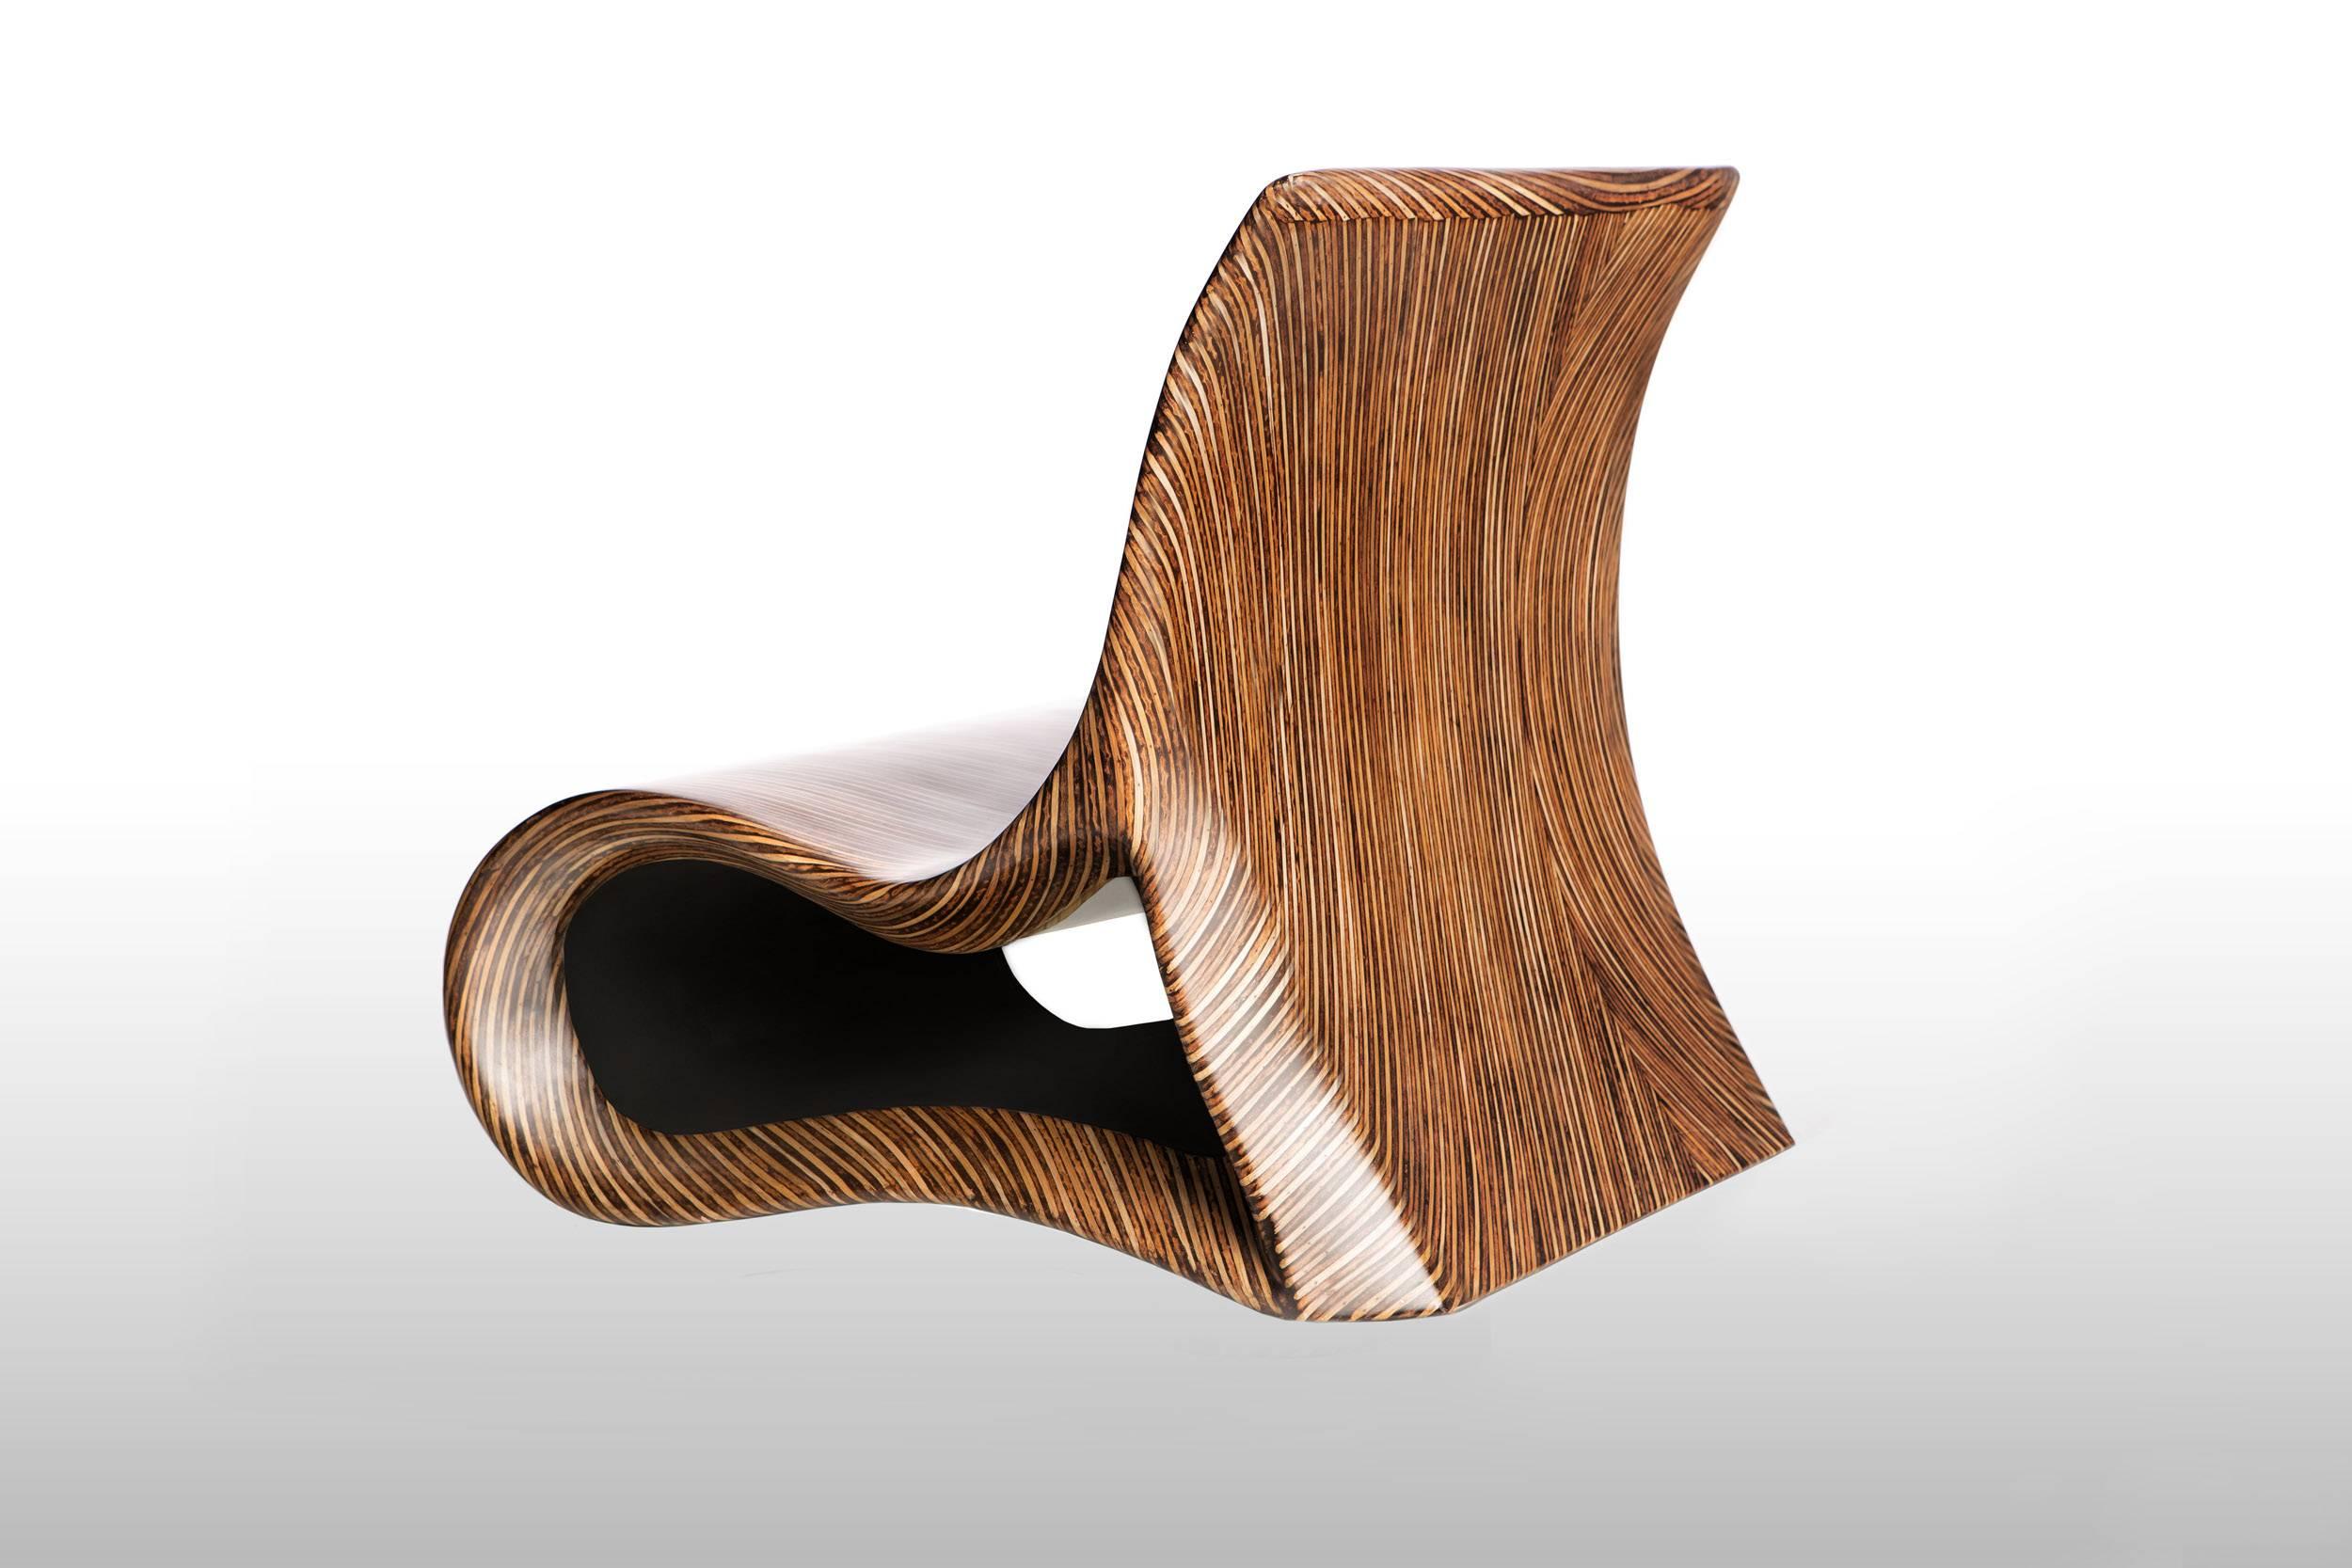 The Altoum chair is a mesmerizing piece of furniture, with its meandering curves and seemingly endless tree rings. The shape of this seat takes inspiration from Op Art whilst the sophisticated wood inlay finish breathes life into it. Available in